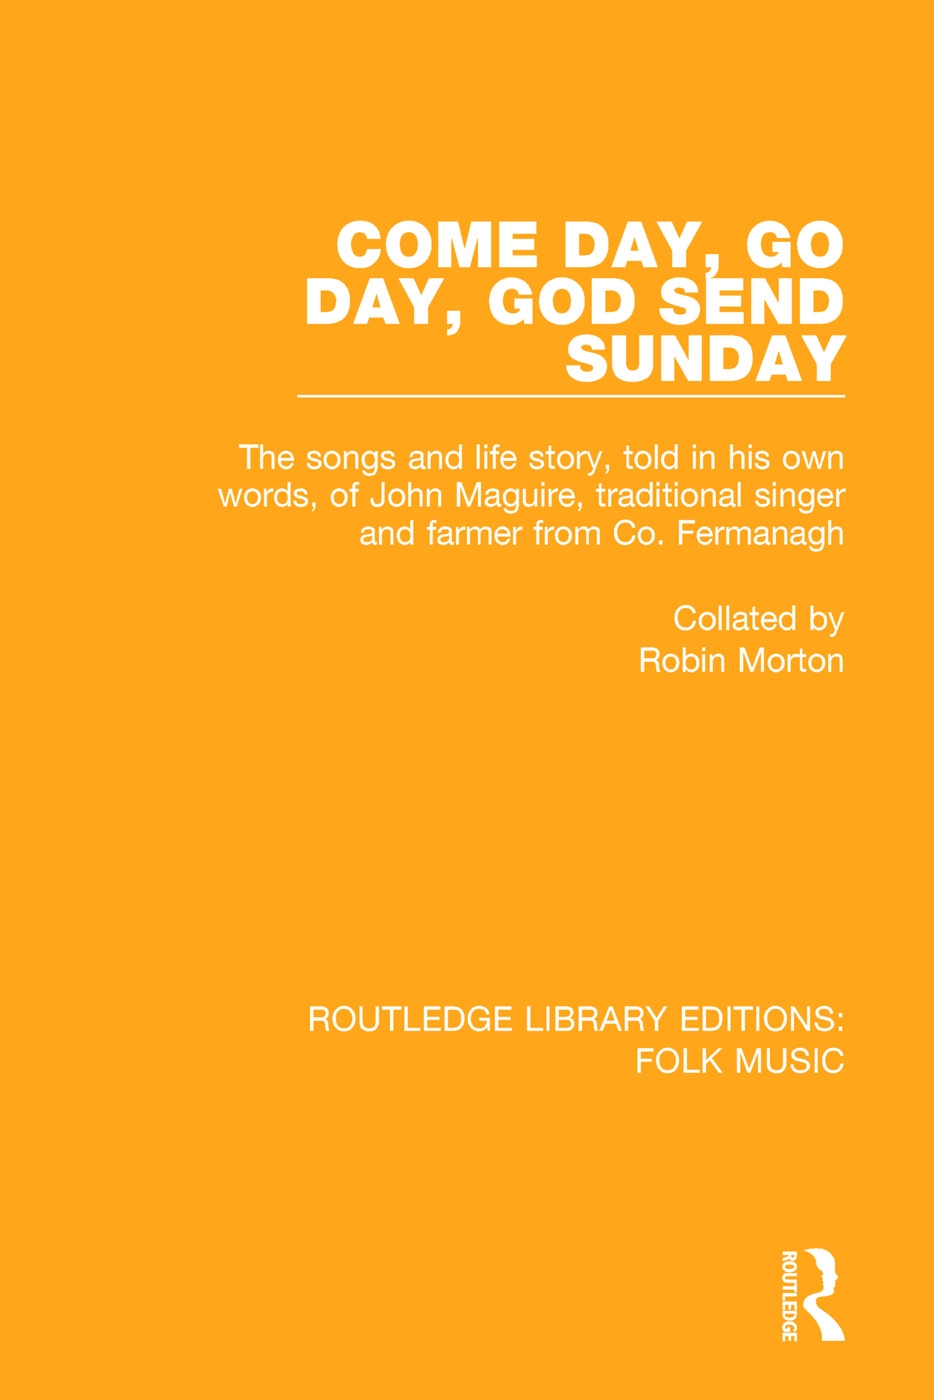 Come Day, Go Day, God Send Sunday: The Songs and Life Story, Told in His Own Words, of John Maguire, Traditional Singer and Farmer from Co. Fermanagh.